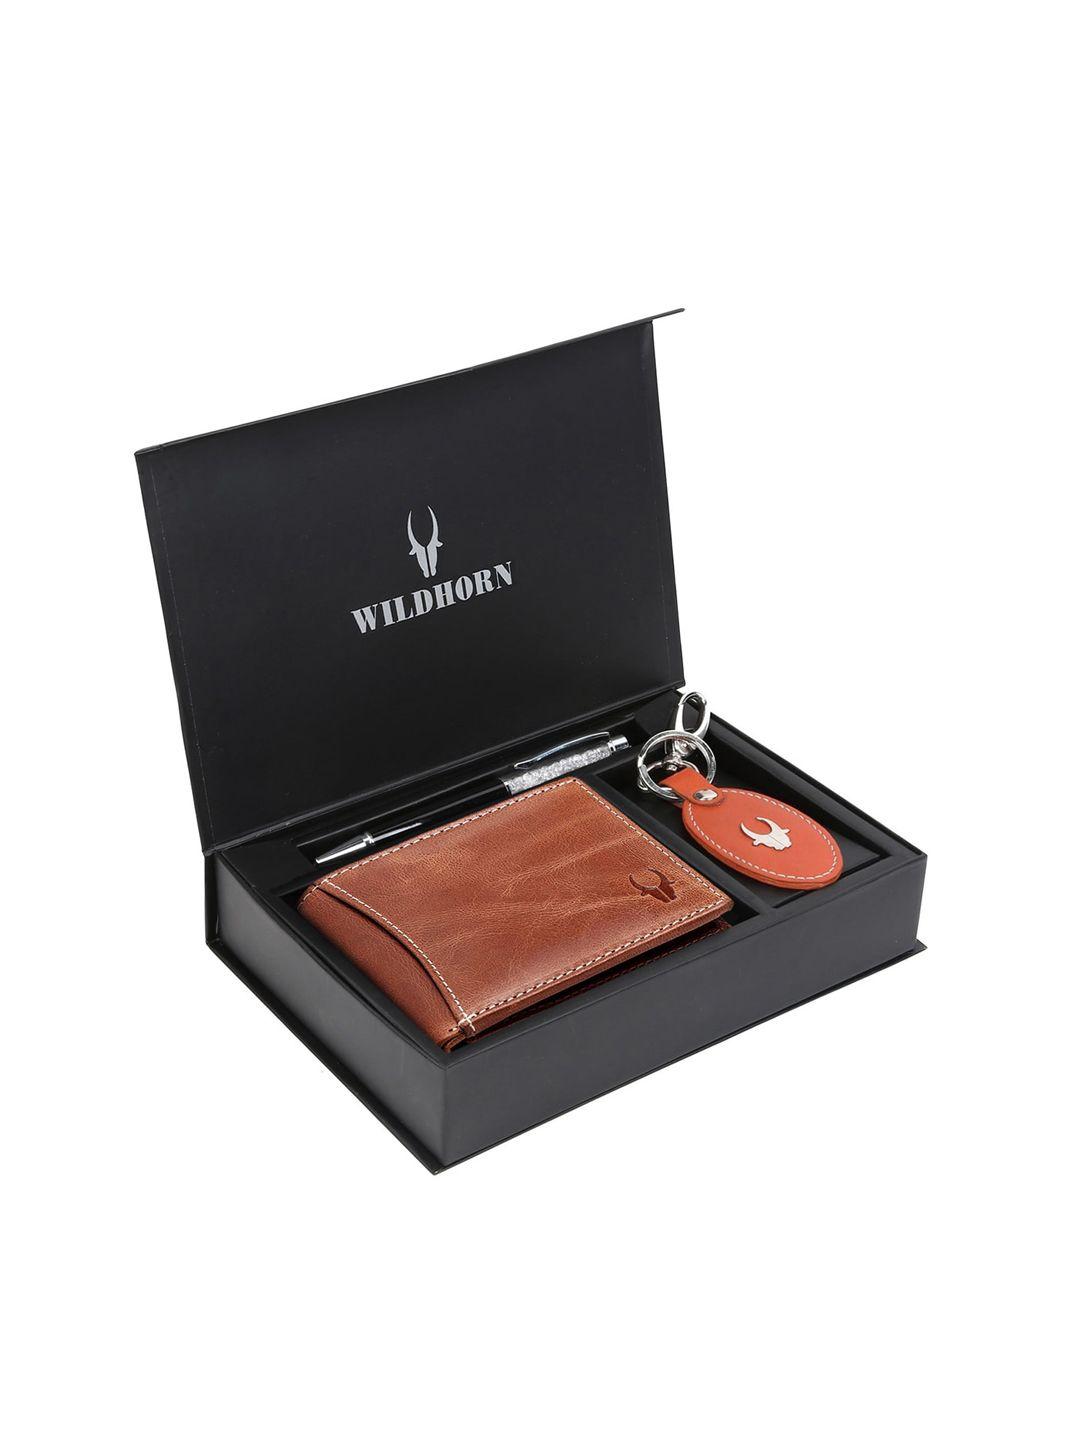 wildhorn men tan brown & red rfid protected genuine leather accessory gift set